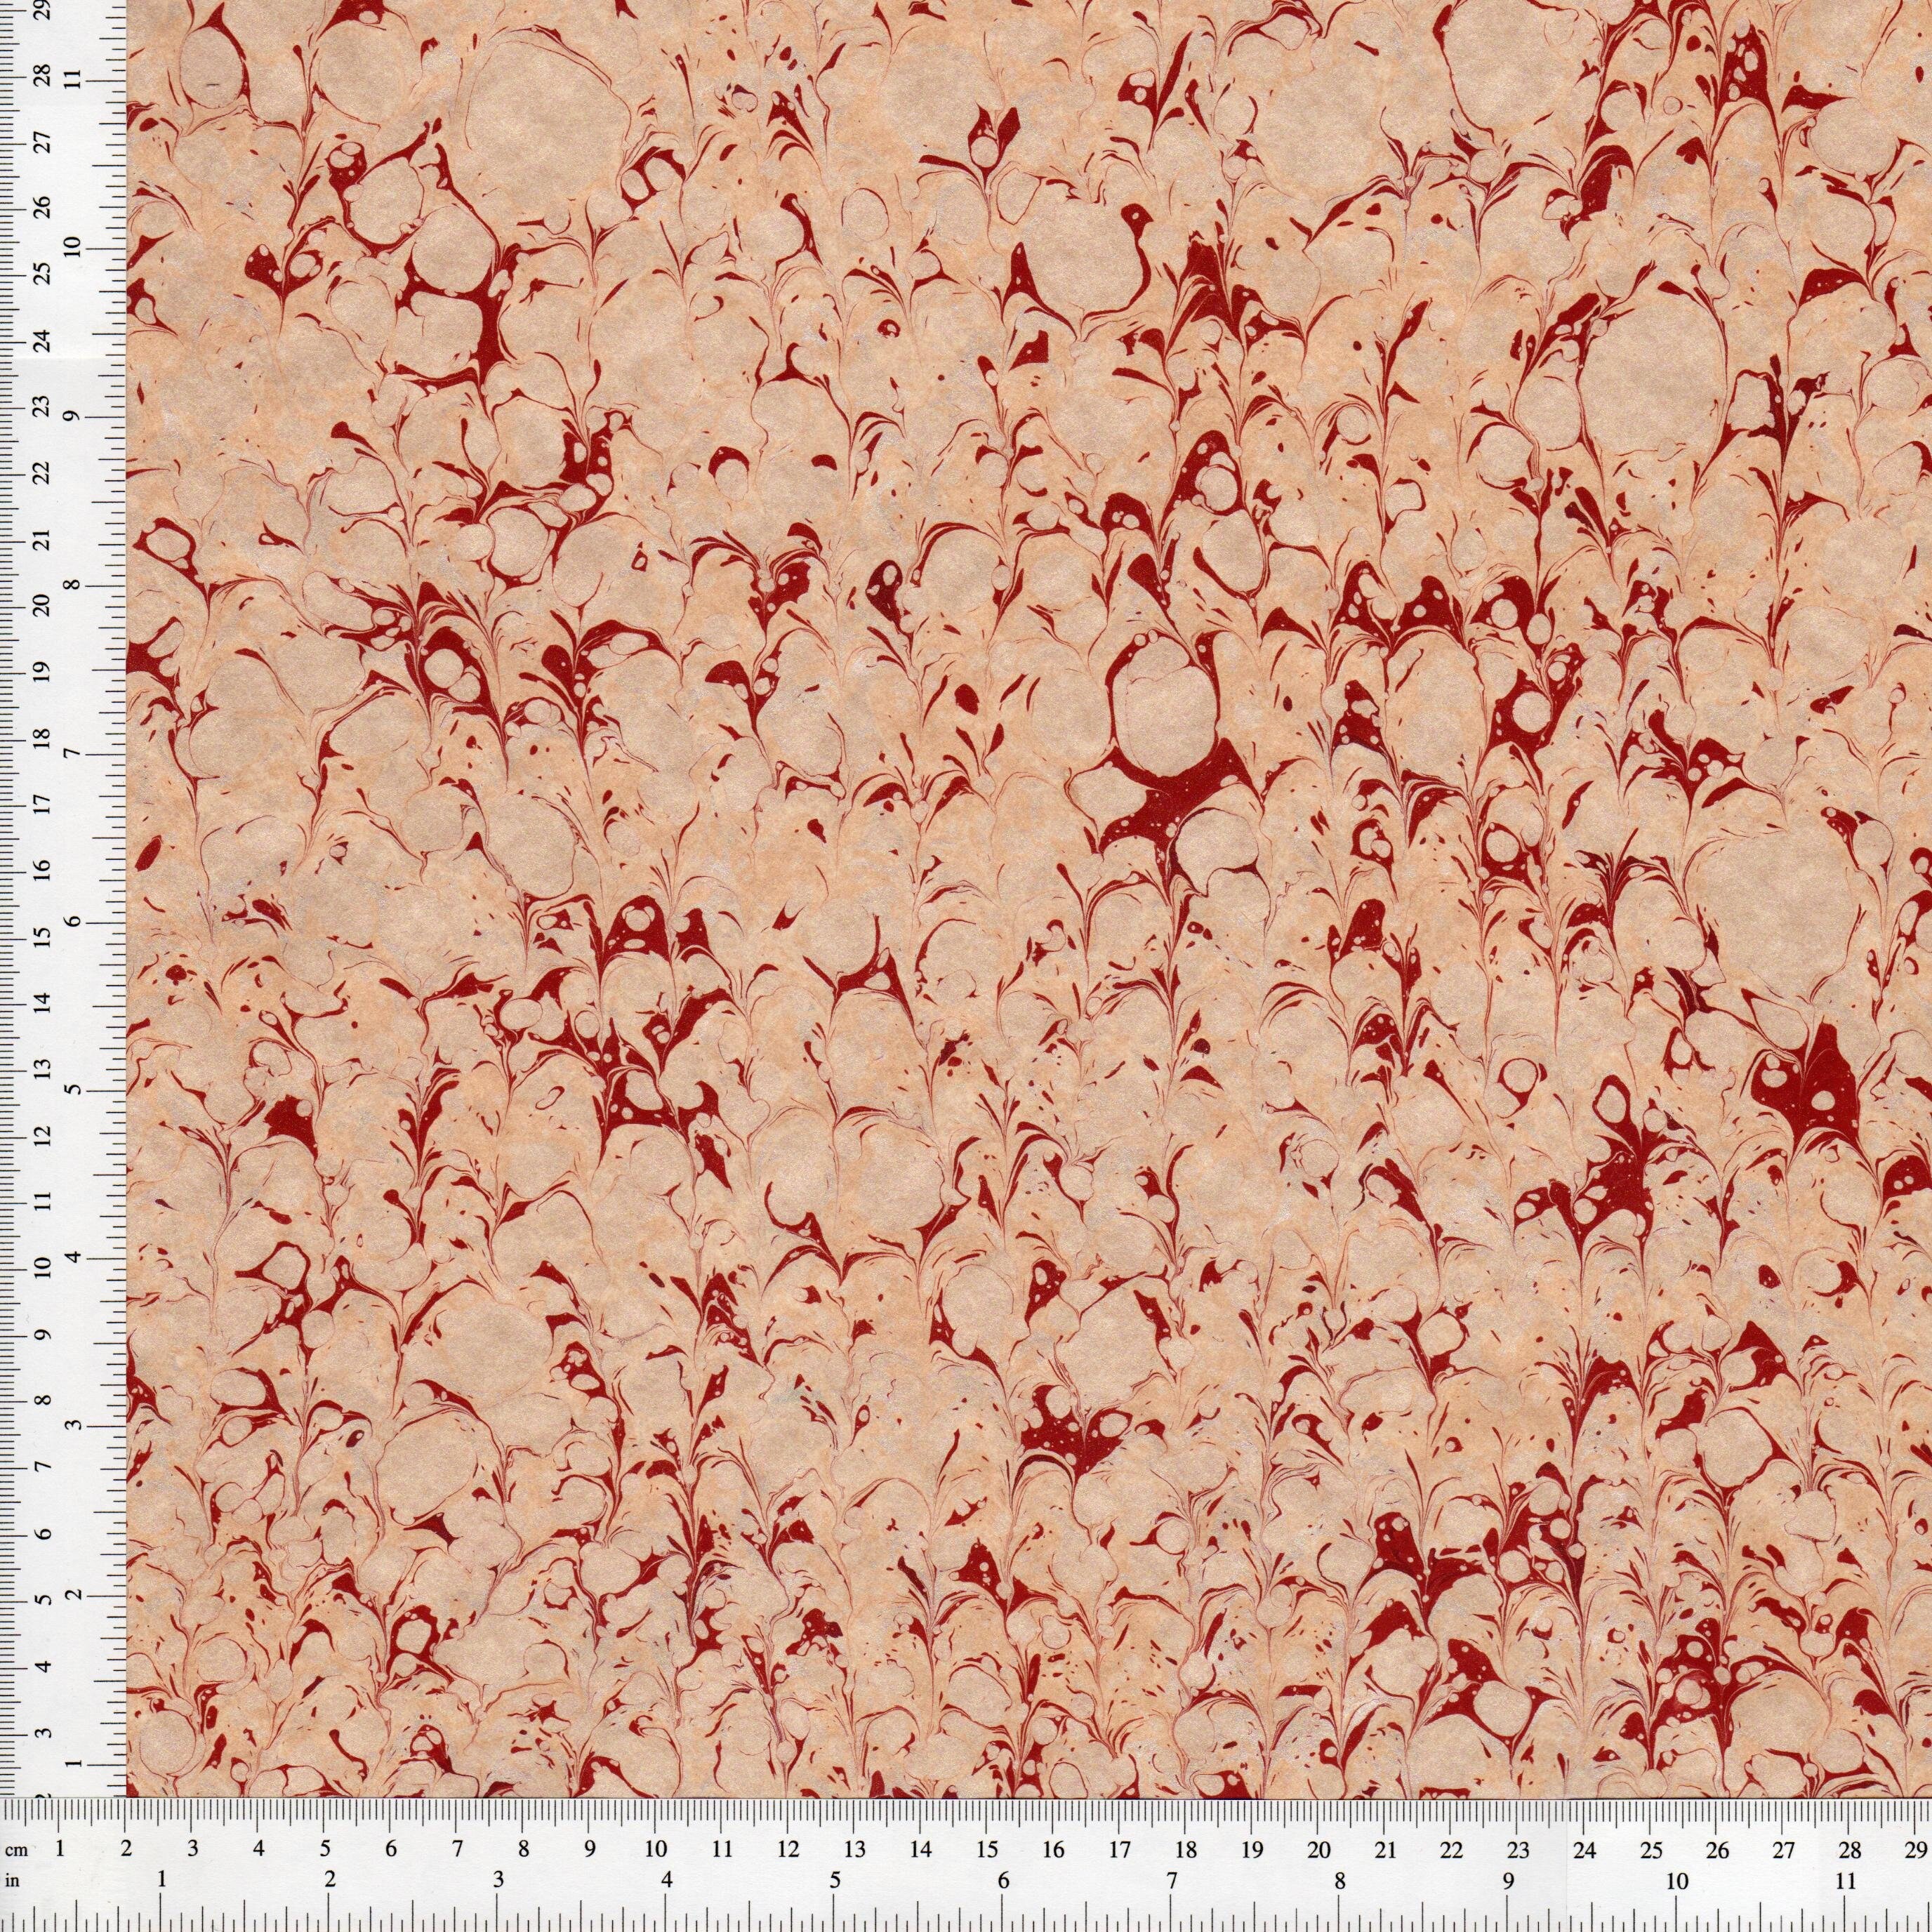 Grade B Hand Marbled Paper 48x67cm 19x26in Bookbinding Restoration Series 